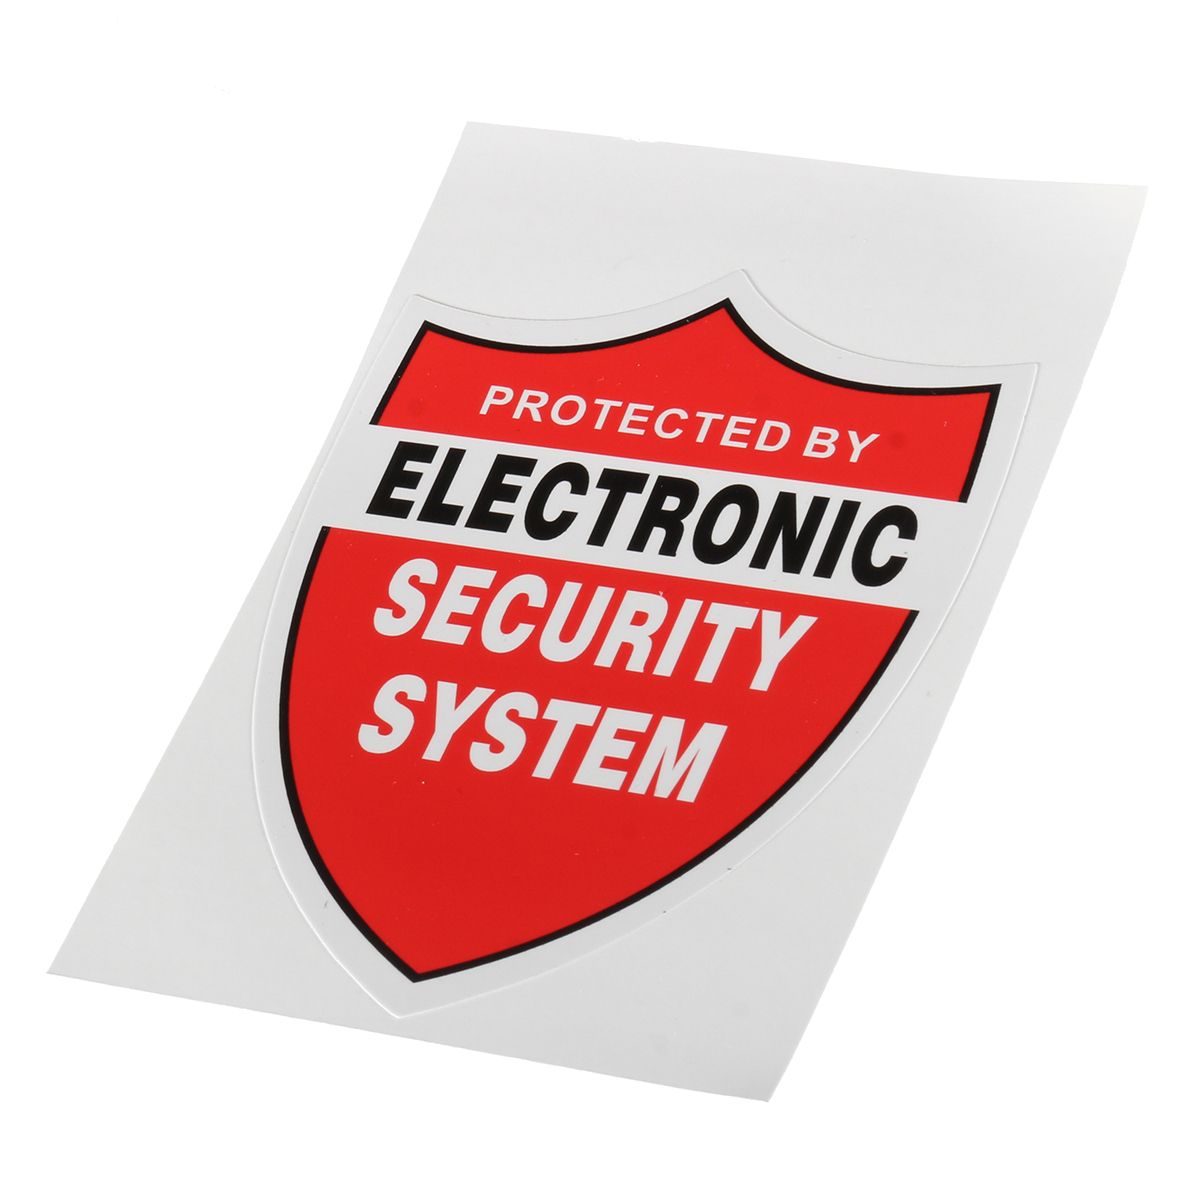 3Pcs-SECURITY-SYSTEM-DECALS-Decor-Sticker-Decal-Video-Warning-CCTV-Camera-Home-Alarm-1283998